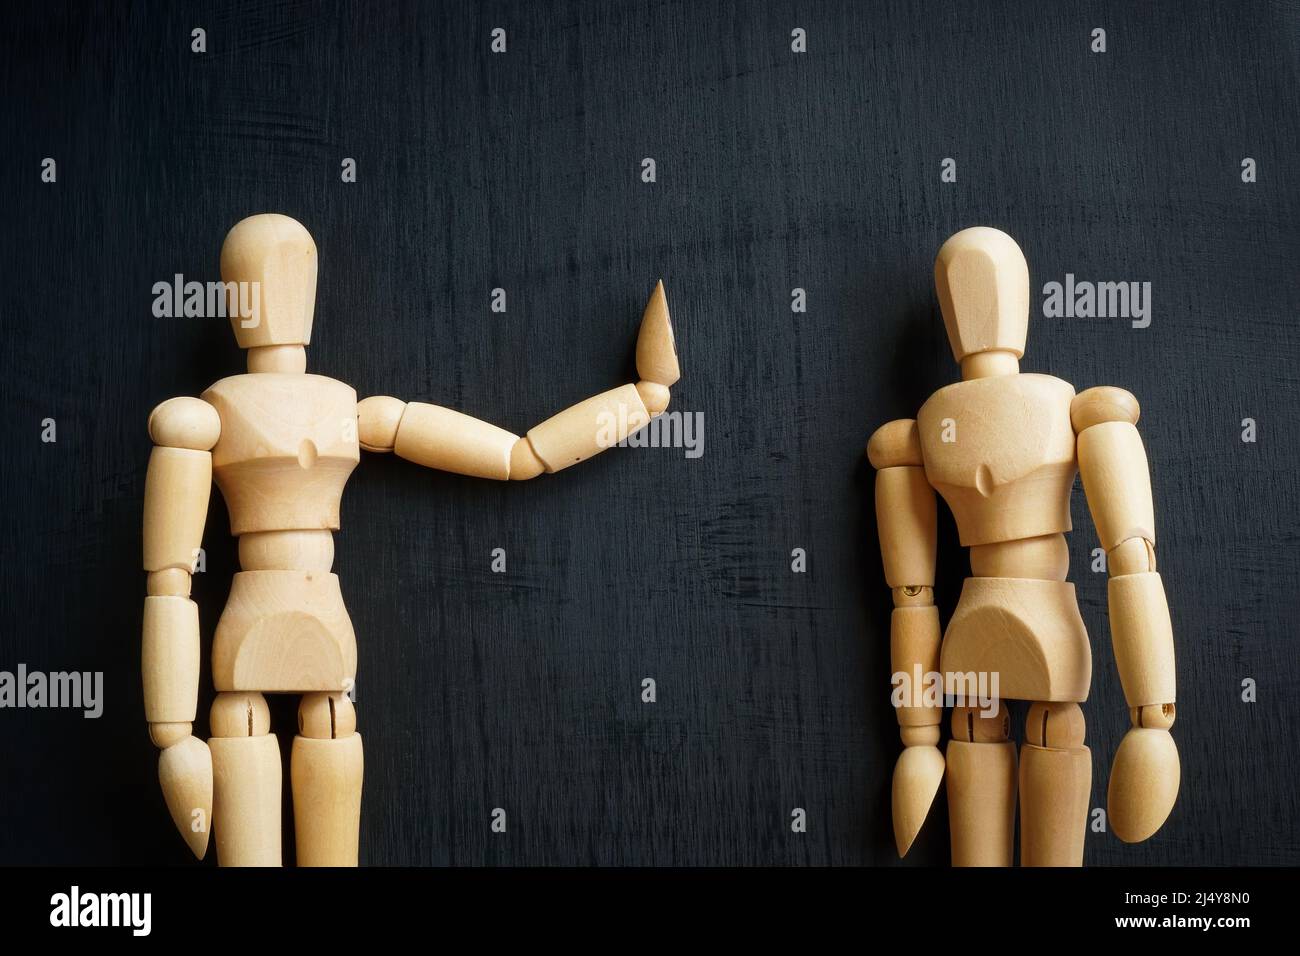 Assertiveness and confidence concept. Two wooden figurines on the dark surface. Stock Photo